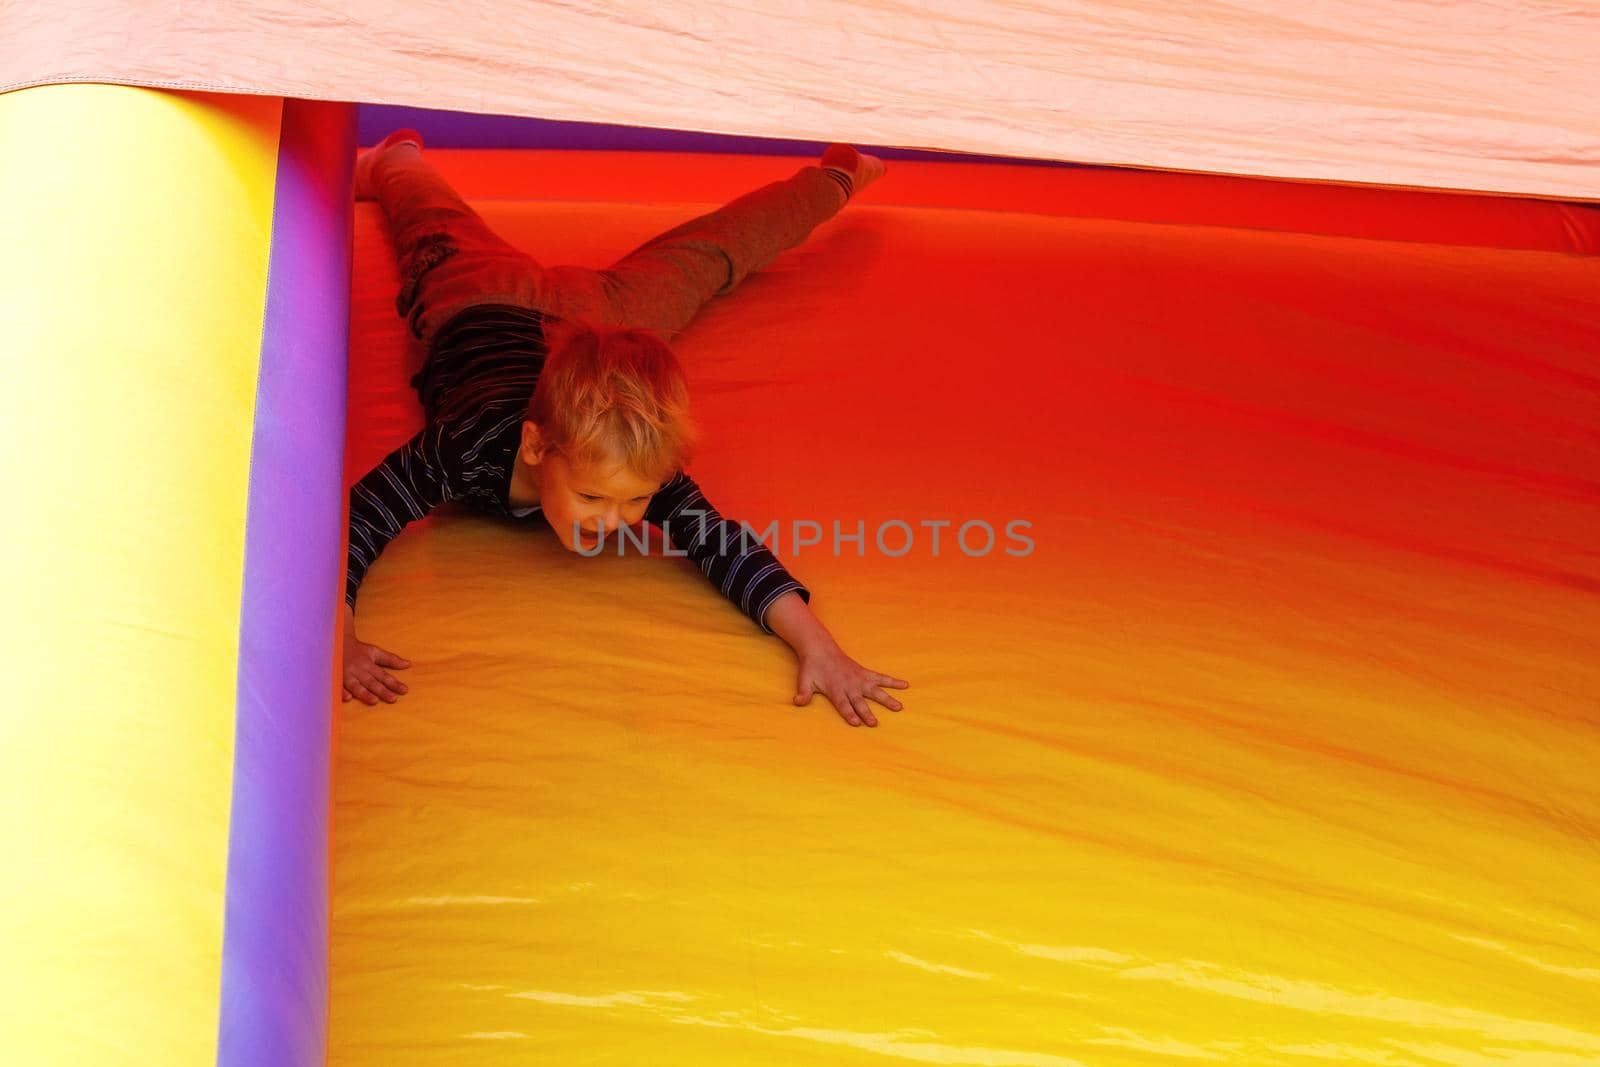 A cheerful boy slides his belly off a large, bright yellow trampoline at high speed.